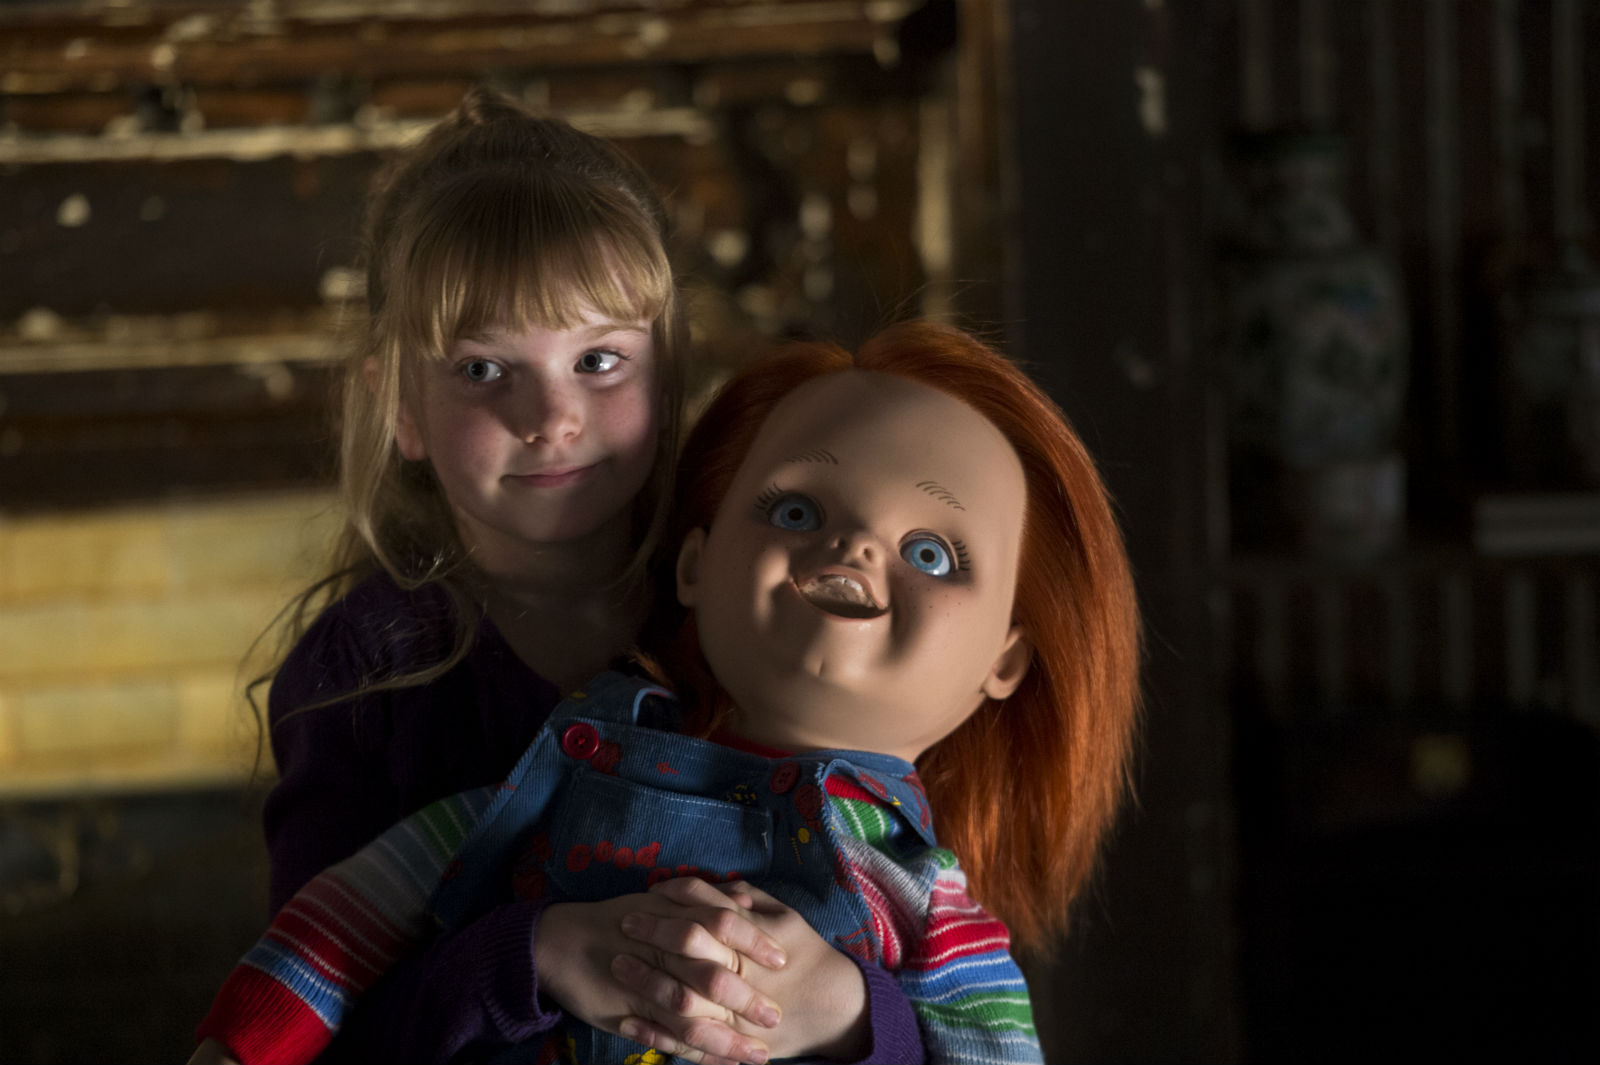 Chucky Returns to His Horror Roots in the CURSE OF CHUCKY Trailer